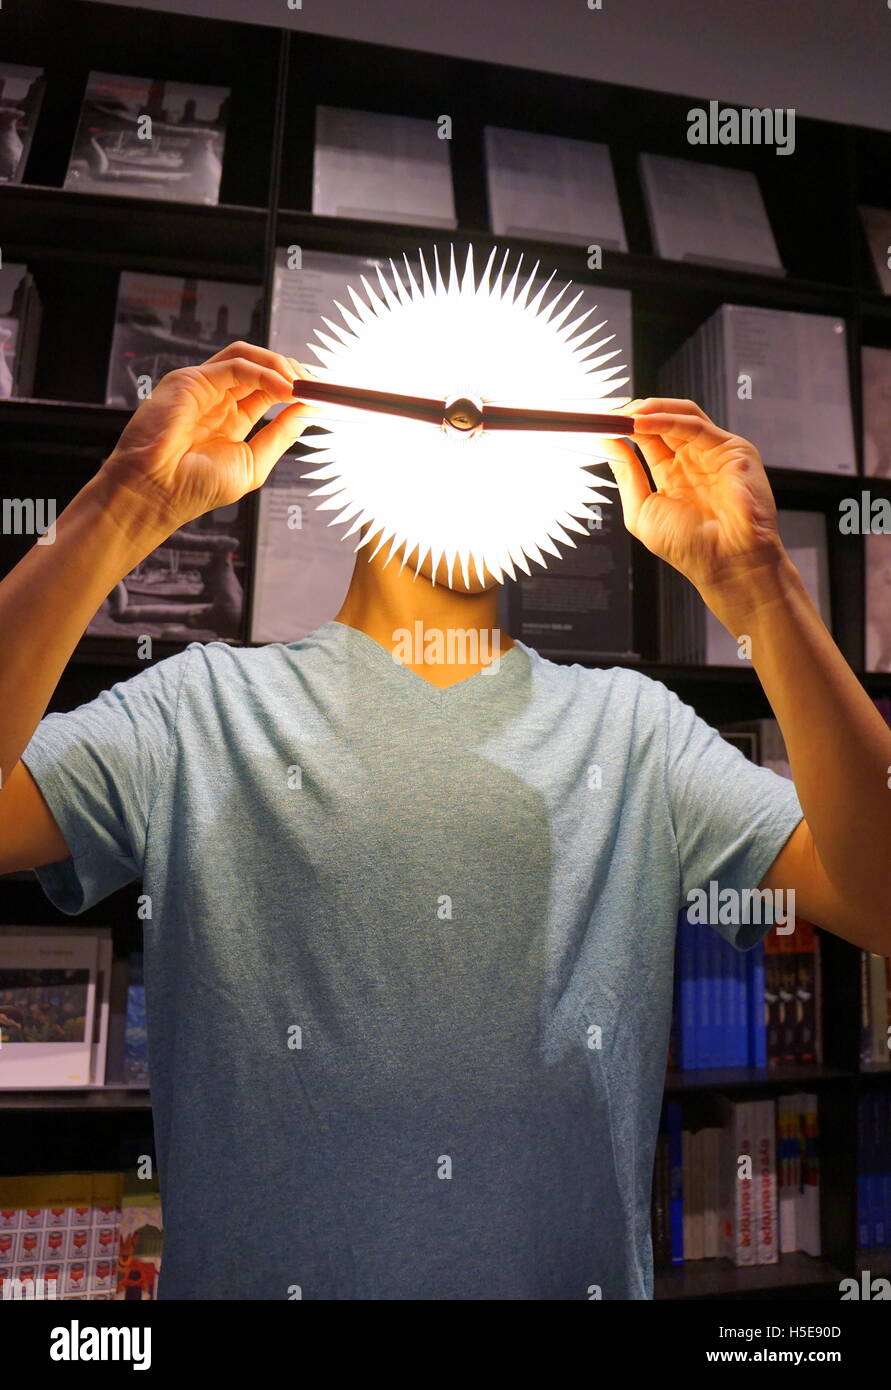 Teenage boy holding a Lumio Book Lamp against his face, creating the illusion of a "bright idea", Museum of Modern Arts, NYC USA Stock Photo